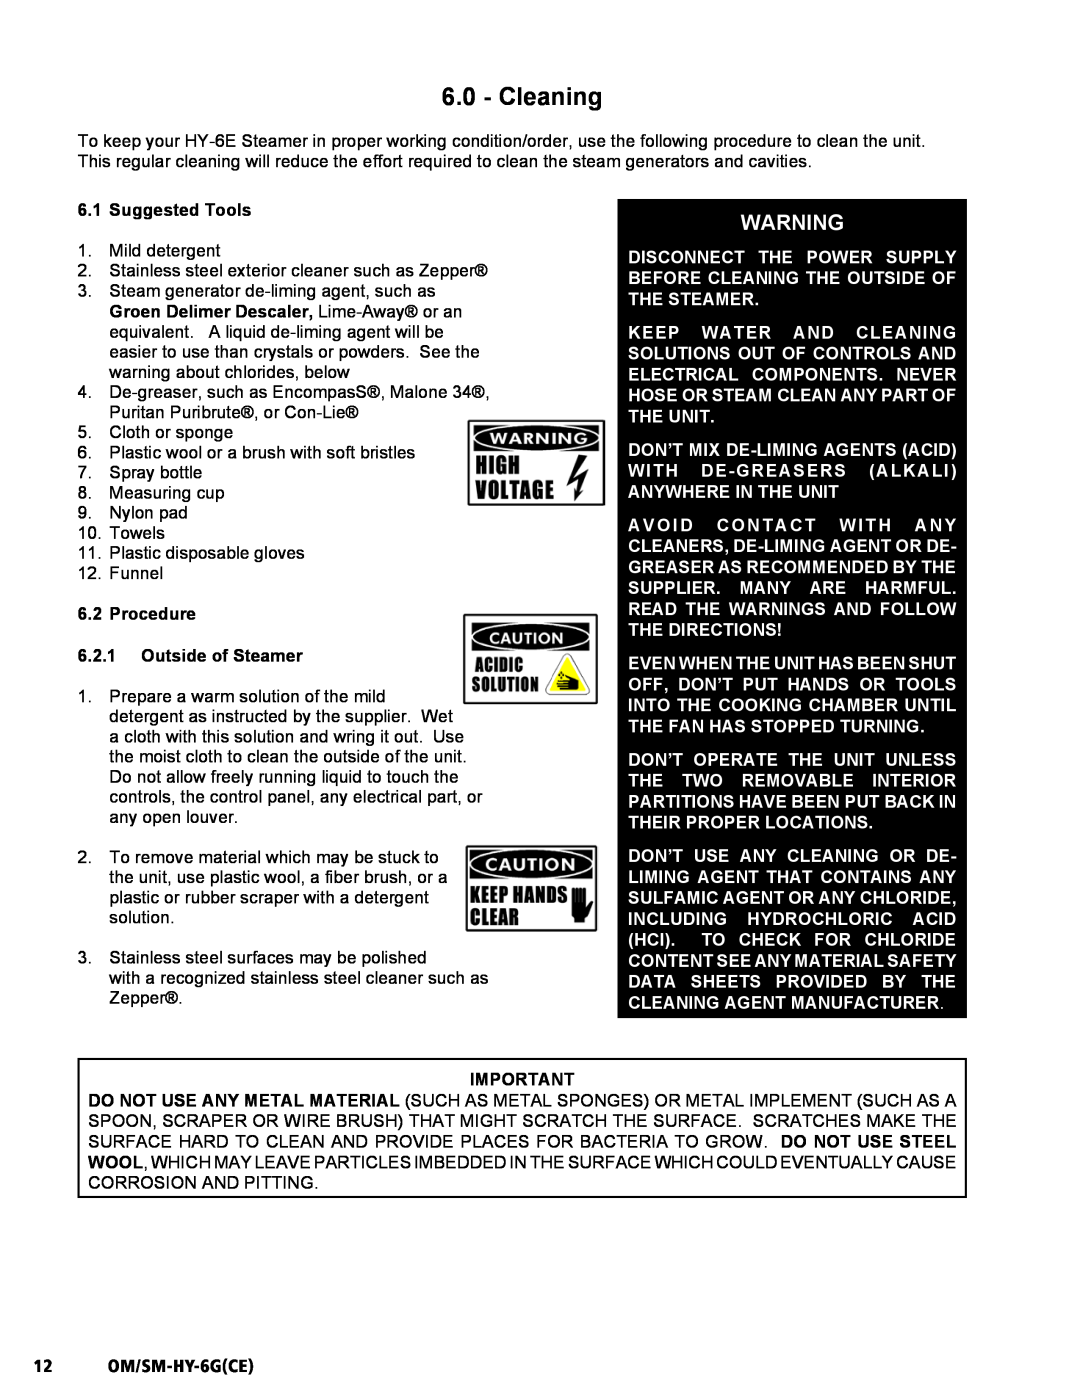 Unified Brands HY-6G(CE) service manual Cleaning, Suggested Tools, Procedure 6.2.1Outside of Steamer, 12 OM/SM-HY-6GCE 